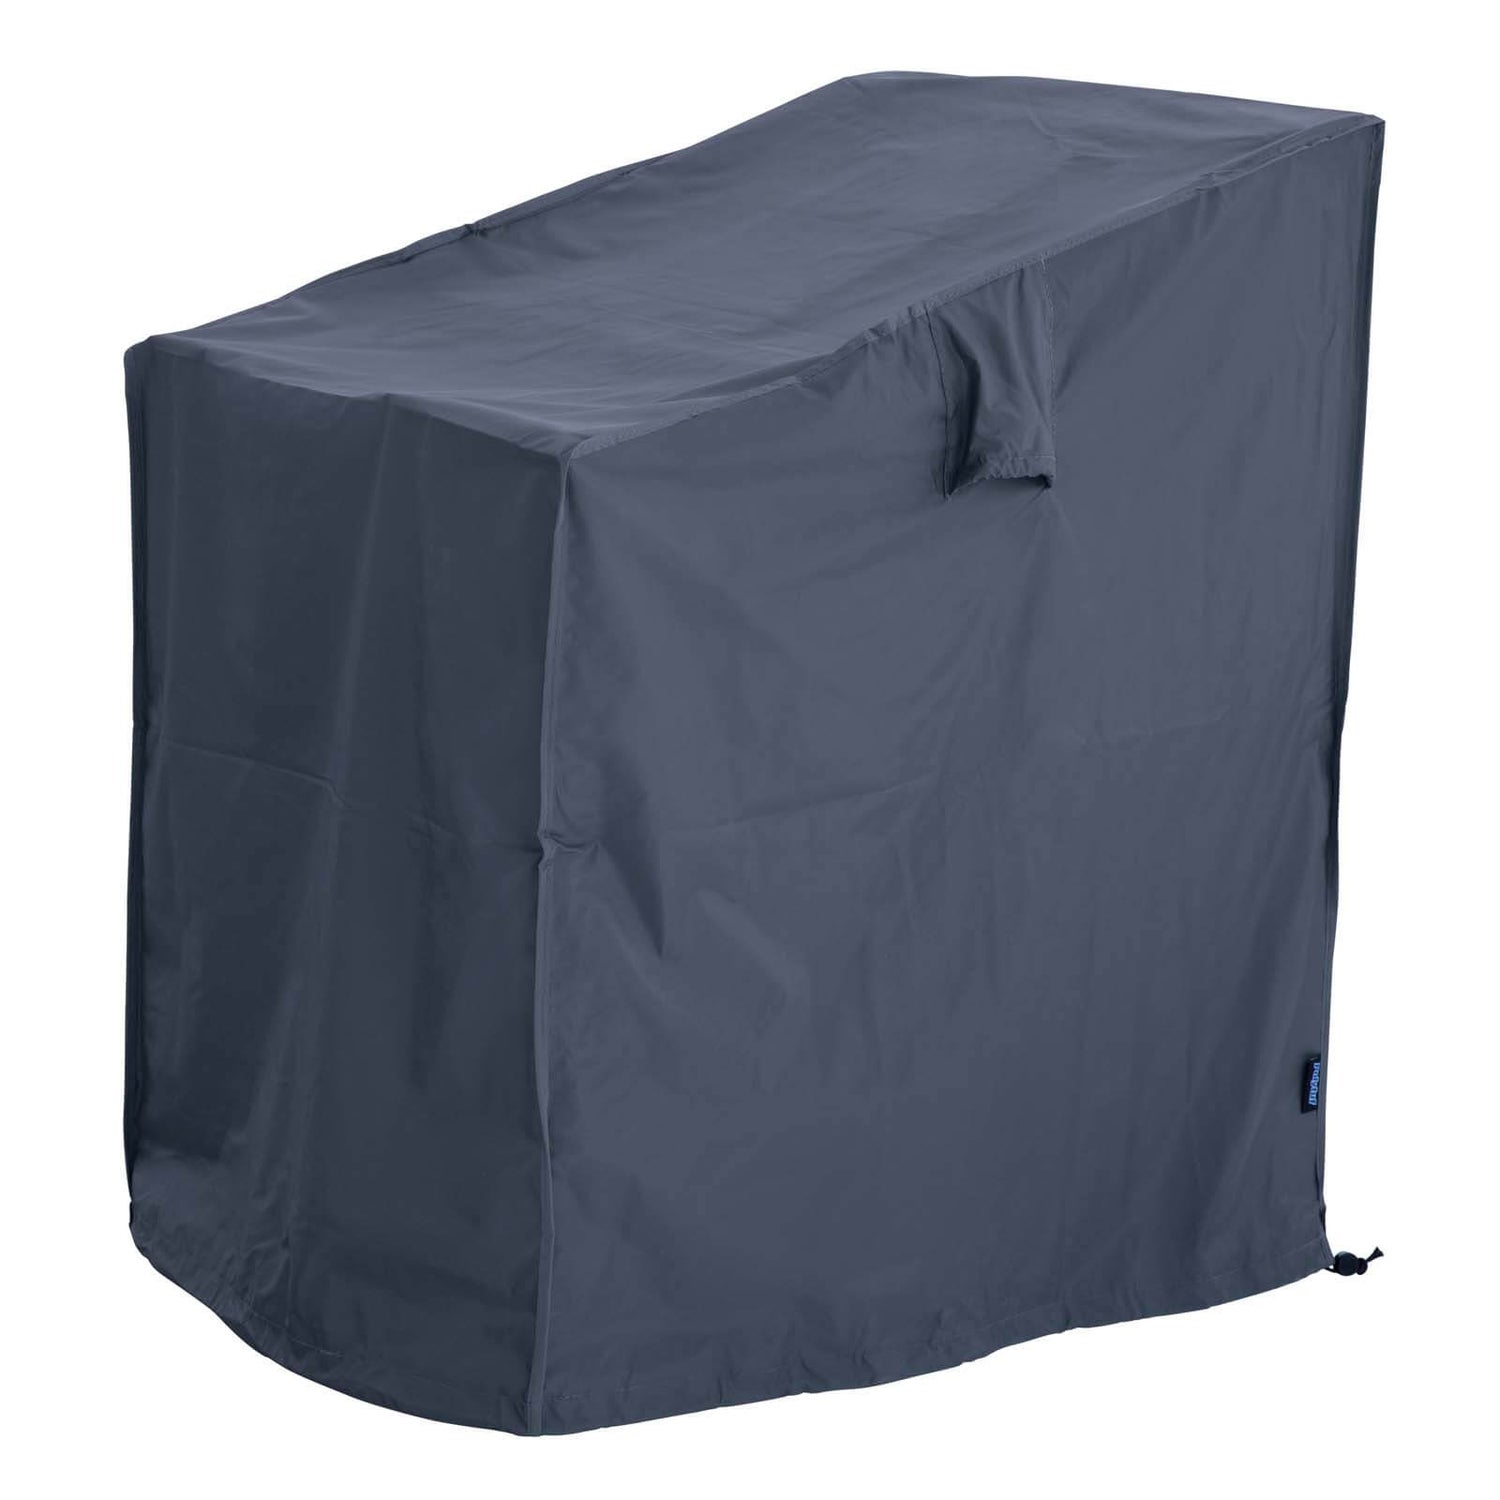 Polytuf Garden Furniture Cover Up To, Outdoor Stacking Chair Covers Uk